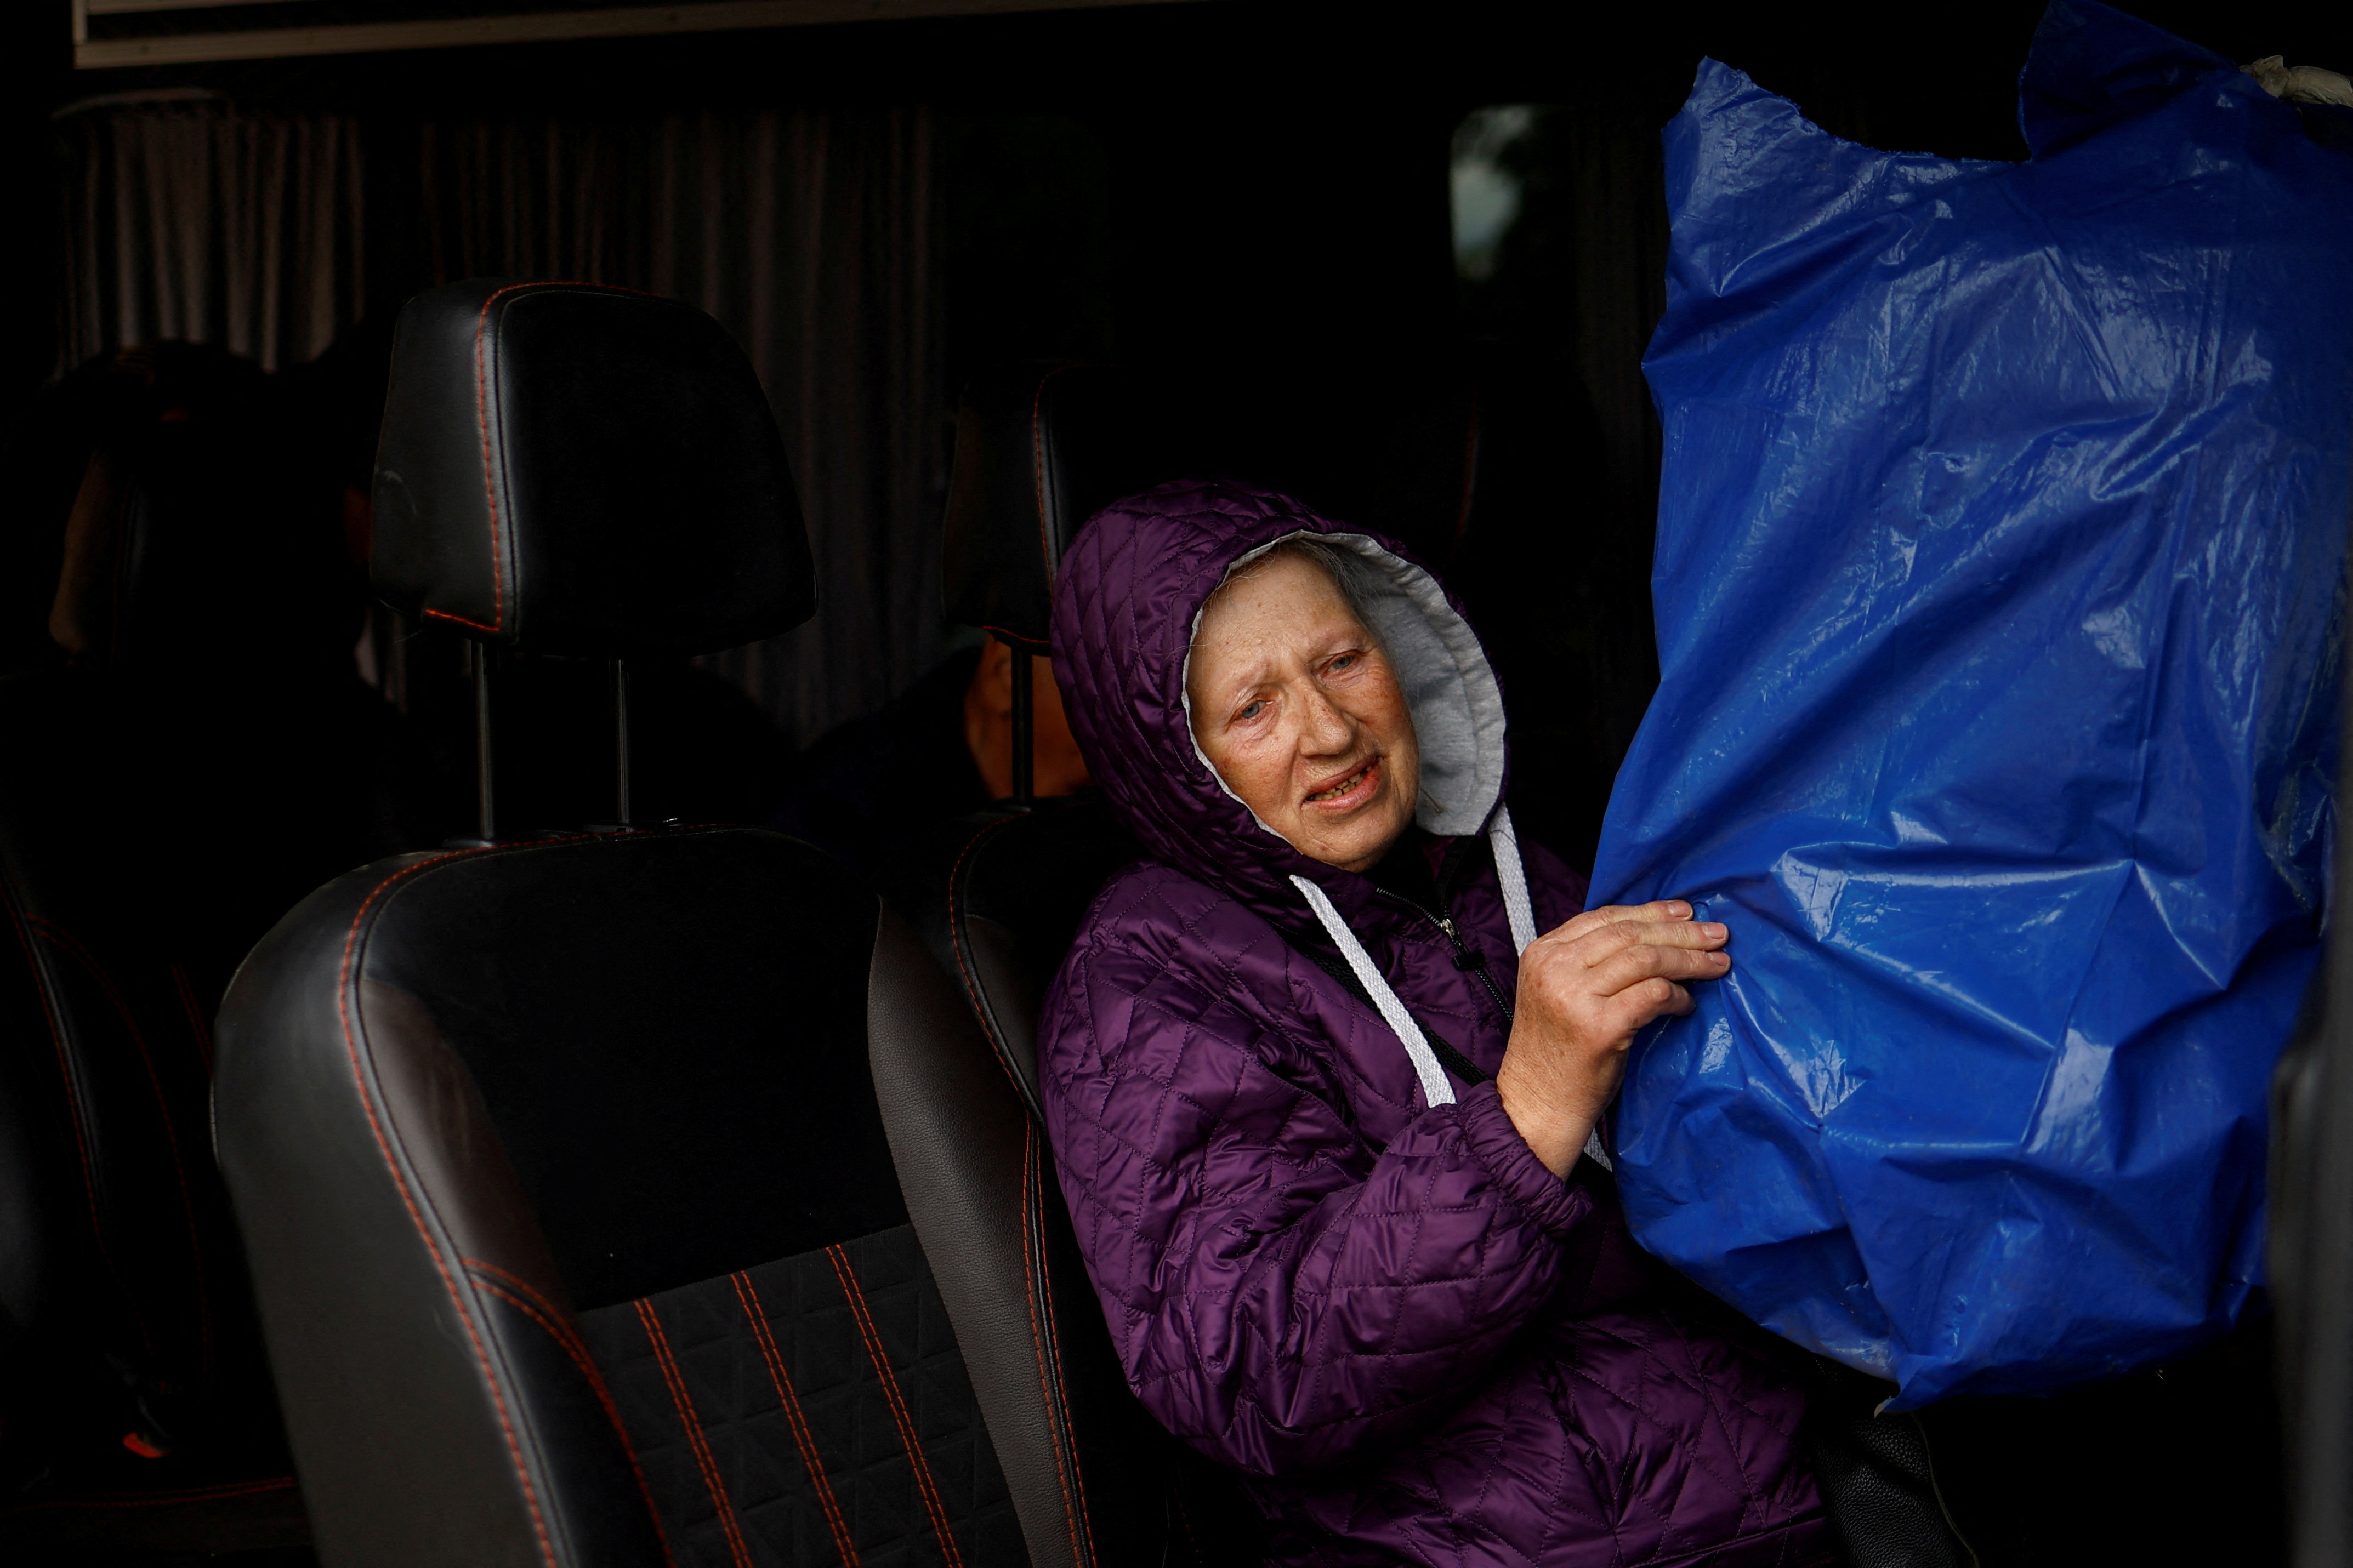 Vovchansk resident Hanna, 74-year-old holds a covered cage with a parrot as she sits inside an evacuation bus to Kharkiv due to Russian shelling near a border in Kharkiv region